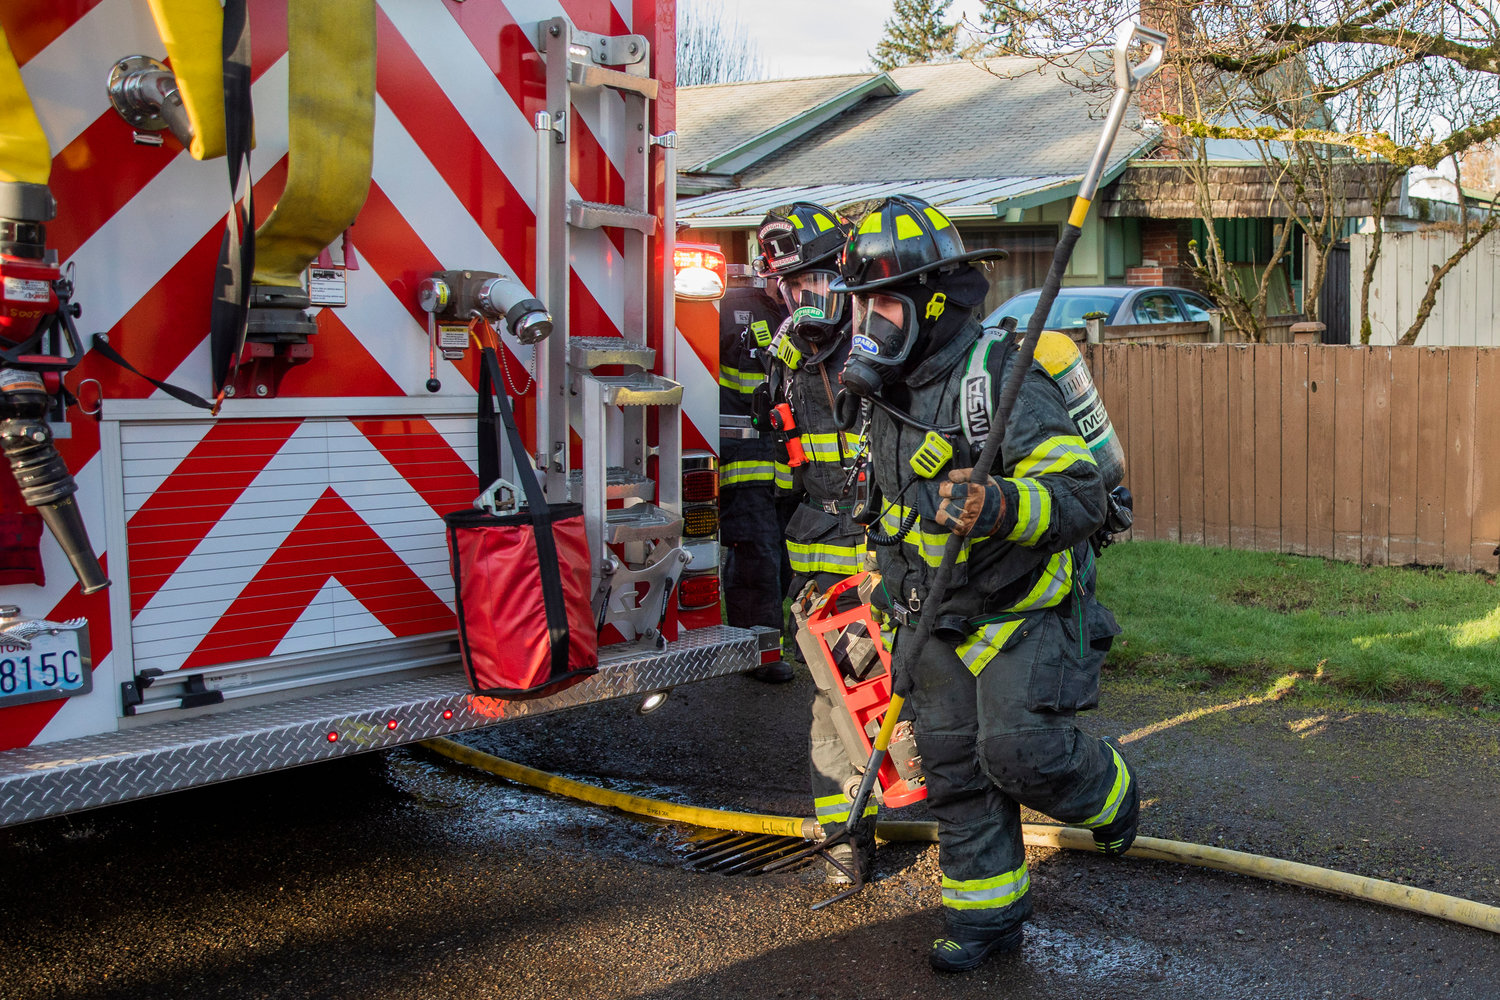 Crews from Riverside Fire Authority respond to a structure fire along View Avenue in Centralia where a detached garage and items inside were damaged by flames Wednesday morning.